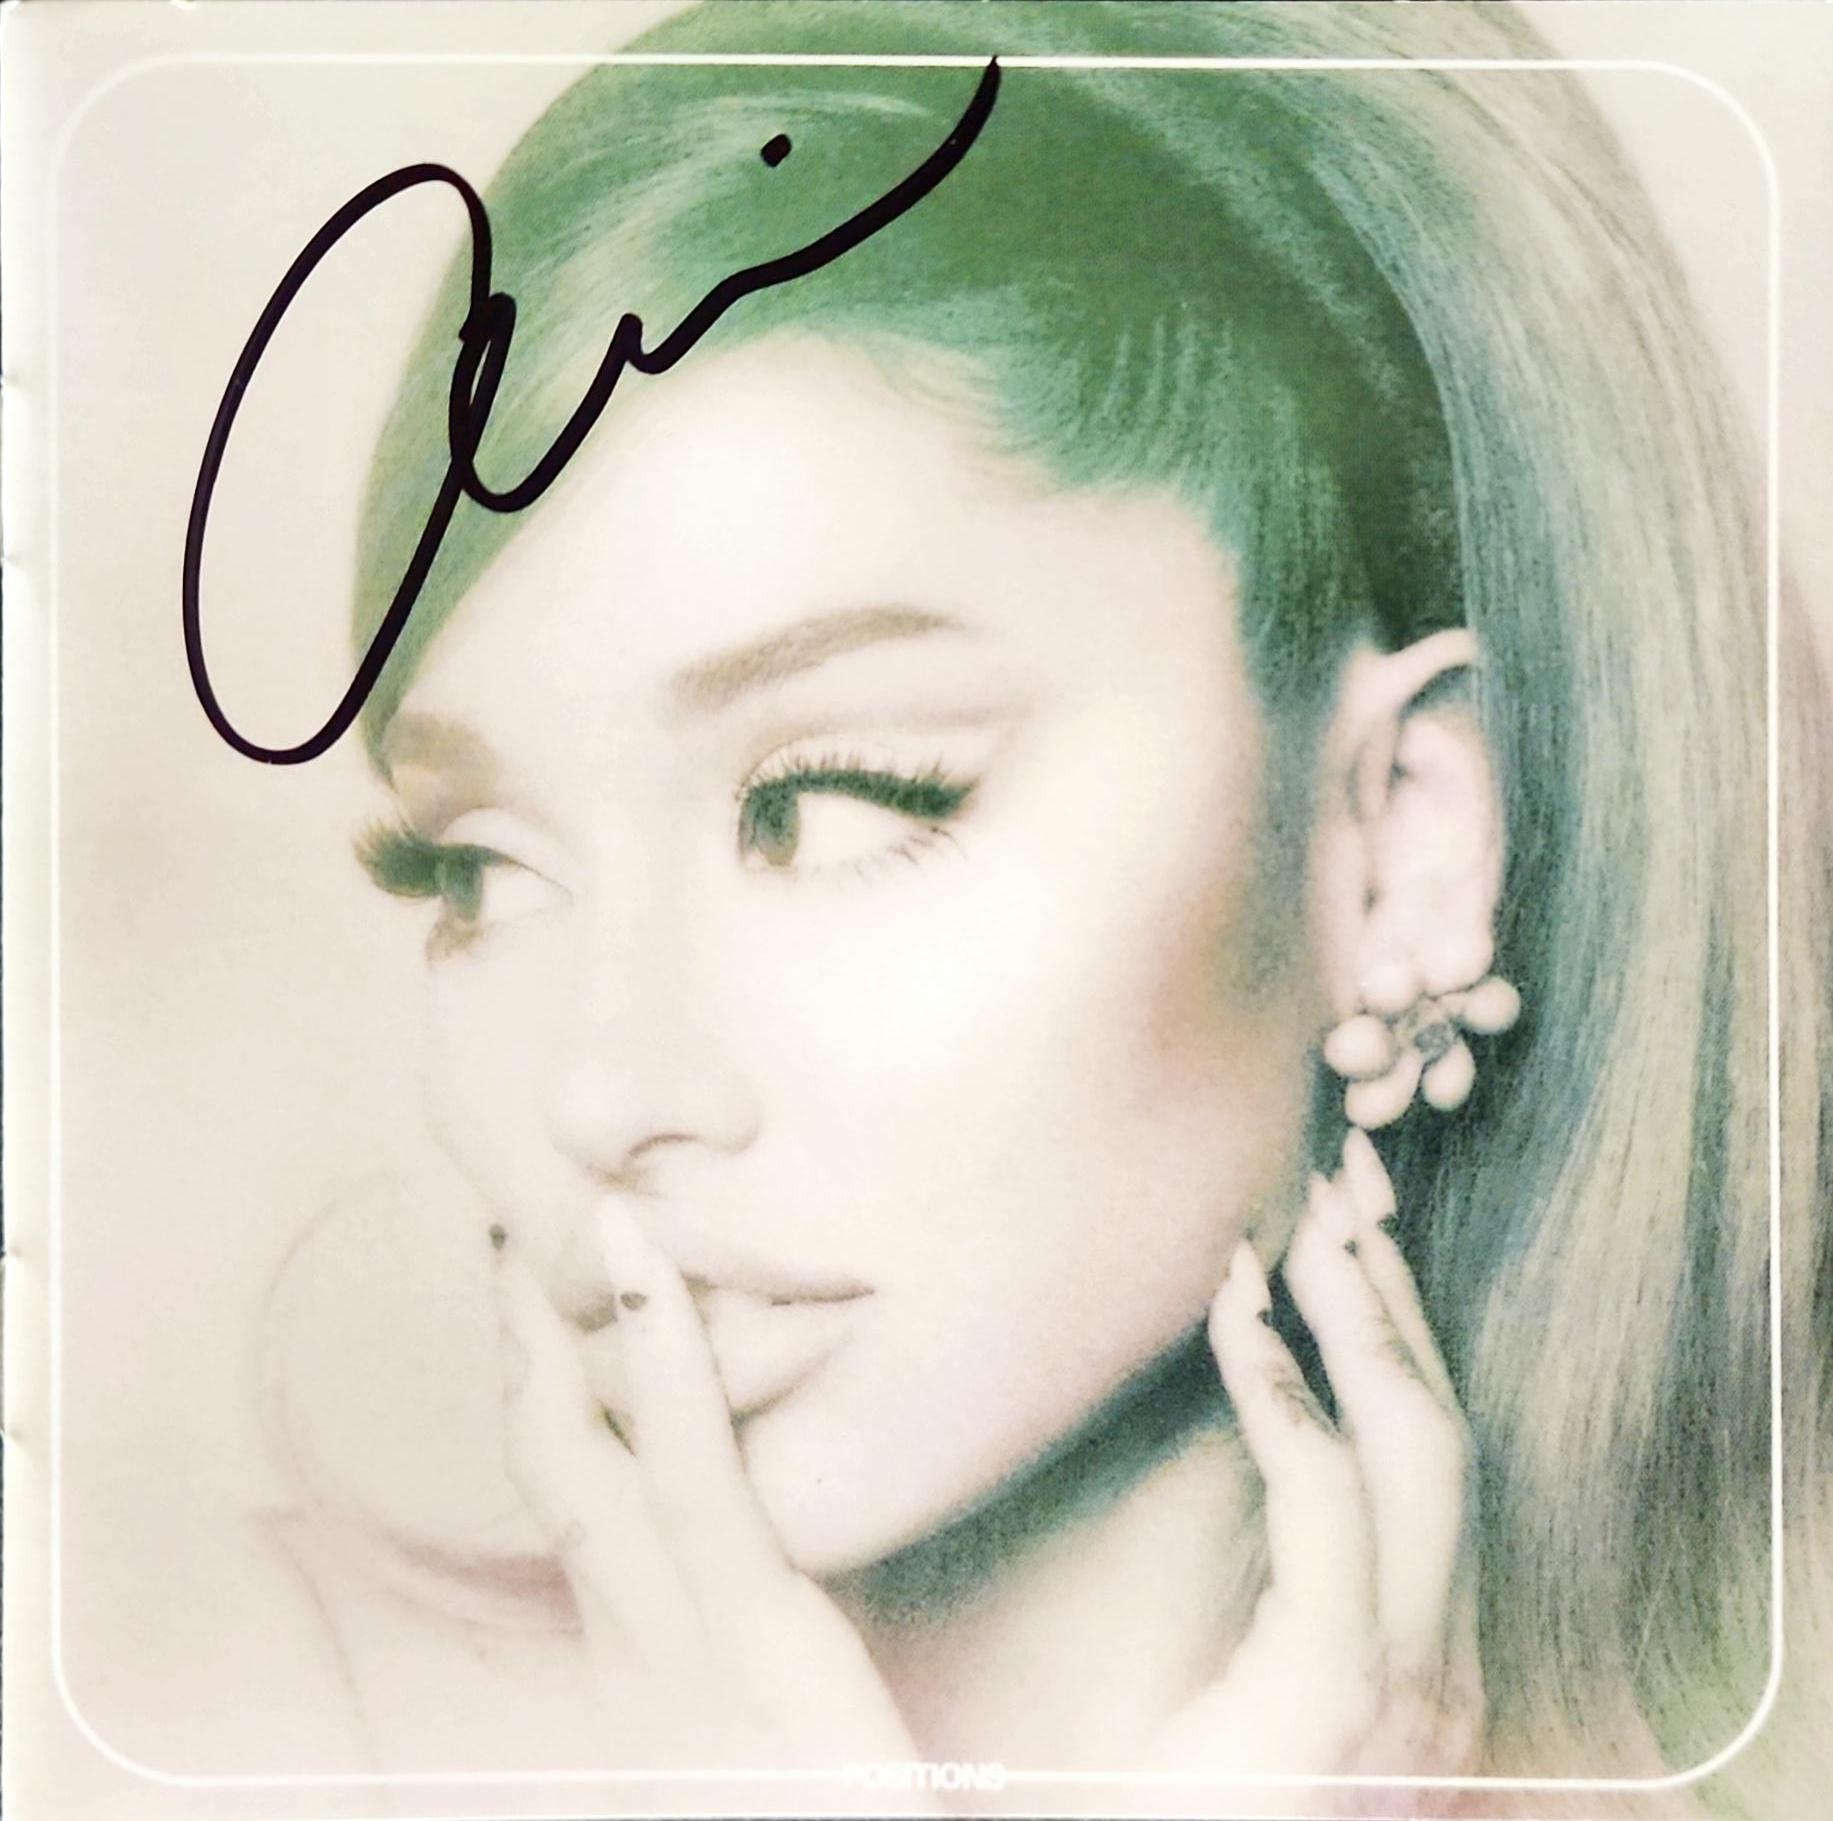 Ariana Grande Signed CD - “Positions” -Framed 10x16 – All In Autographs